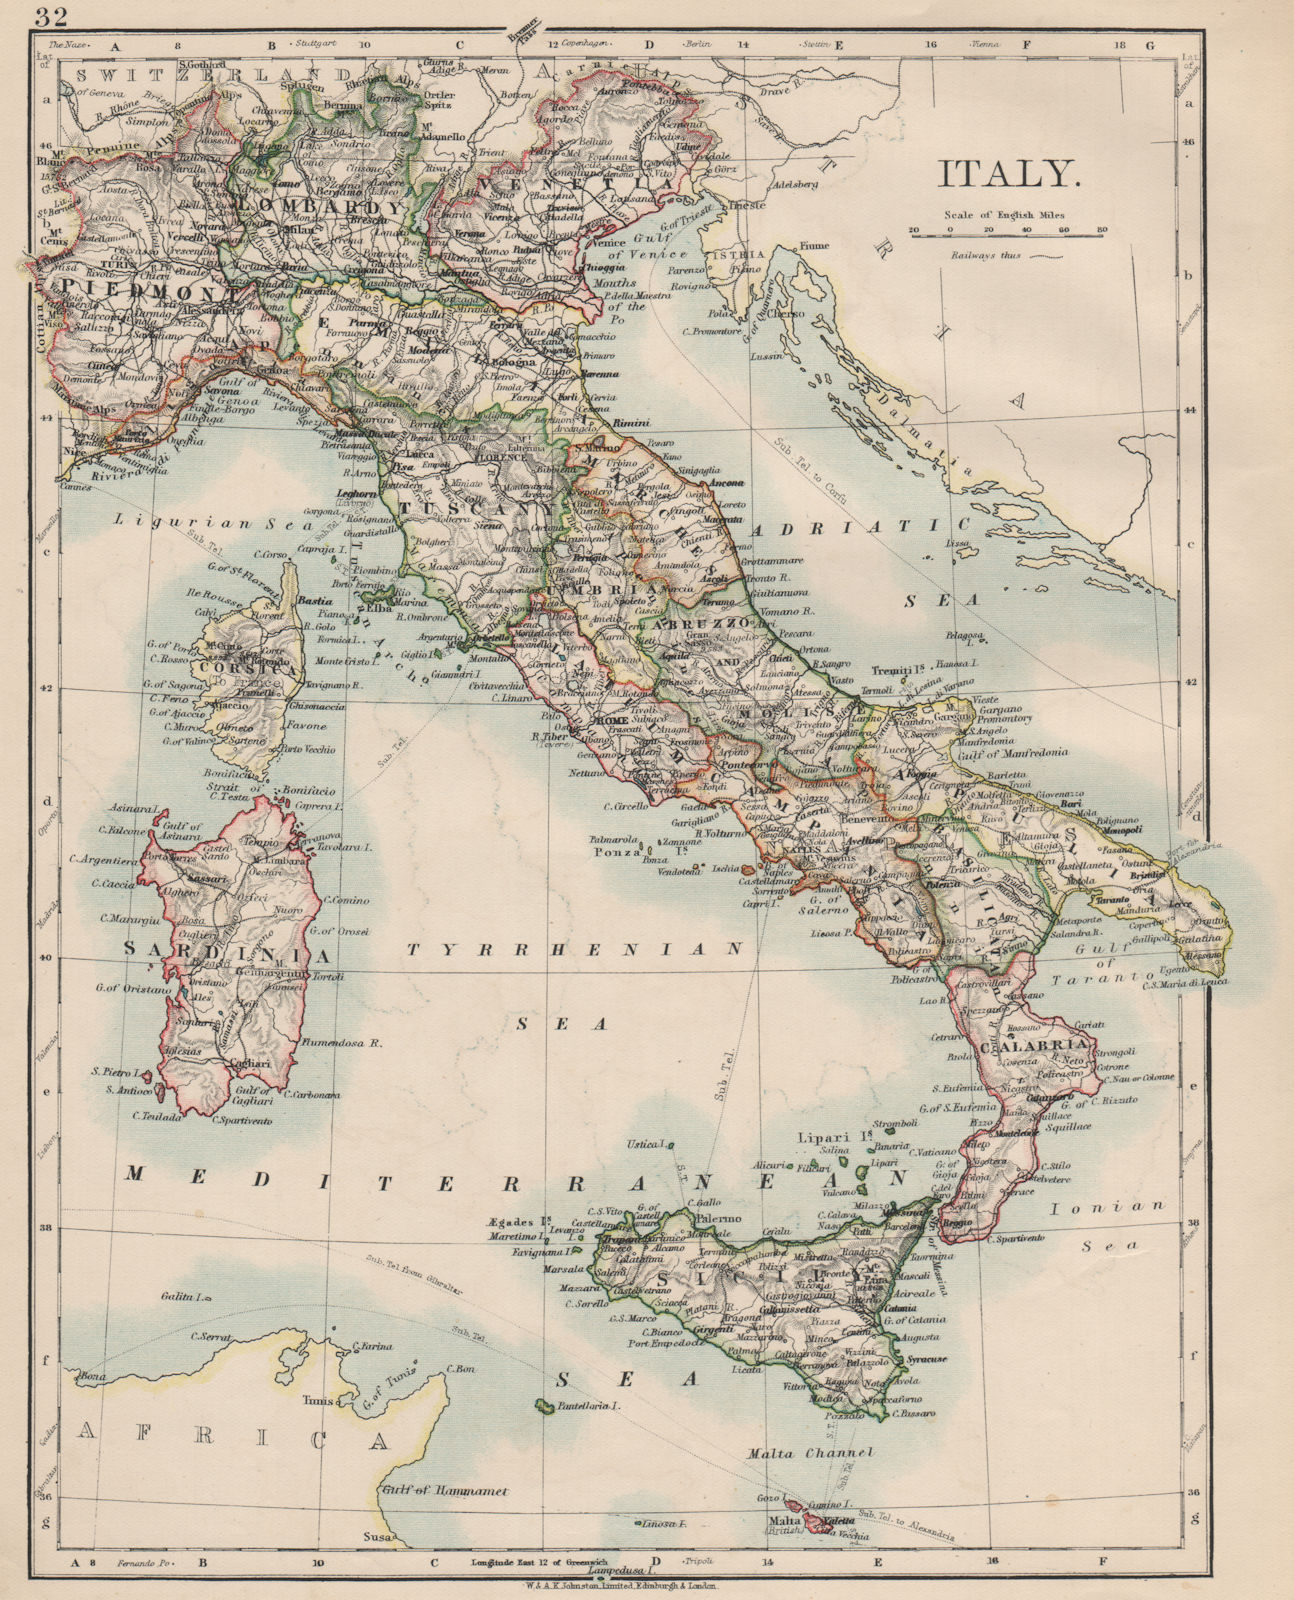 ITALY. Showing states/territorial divisions. JOHNSTON 1903 old antique map